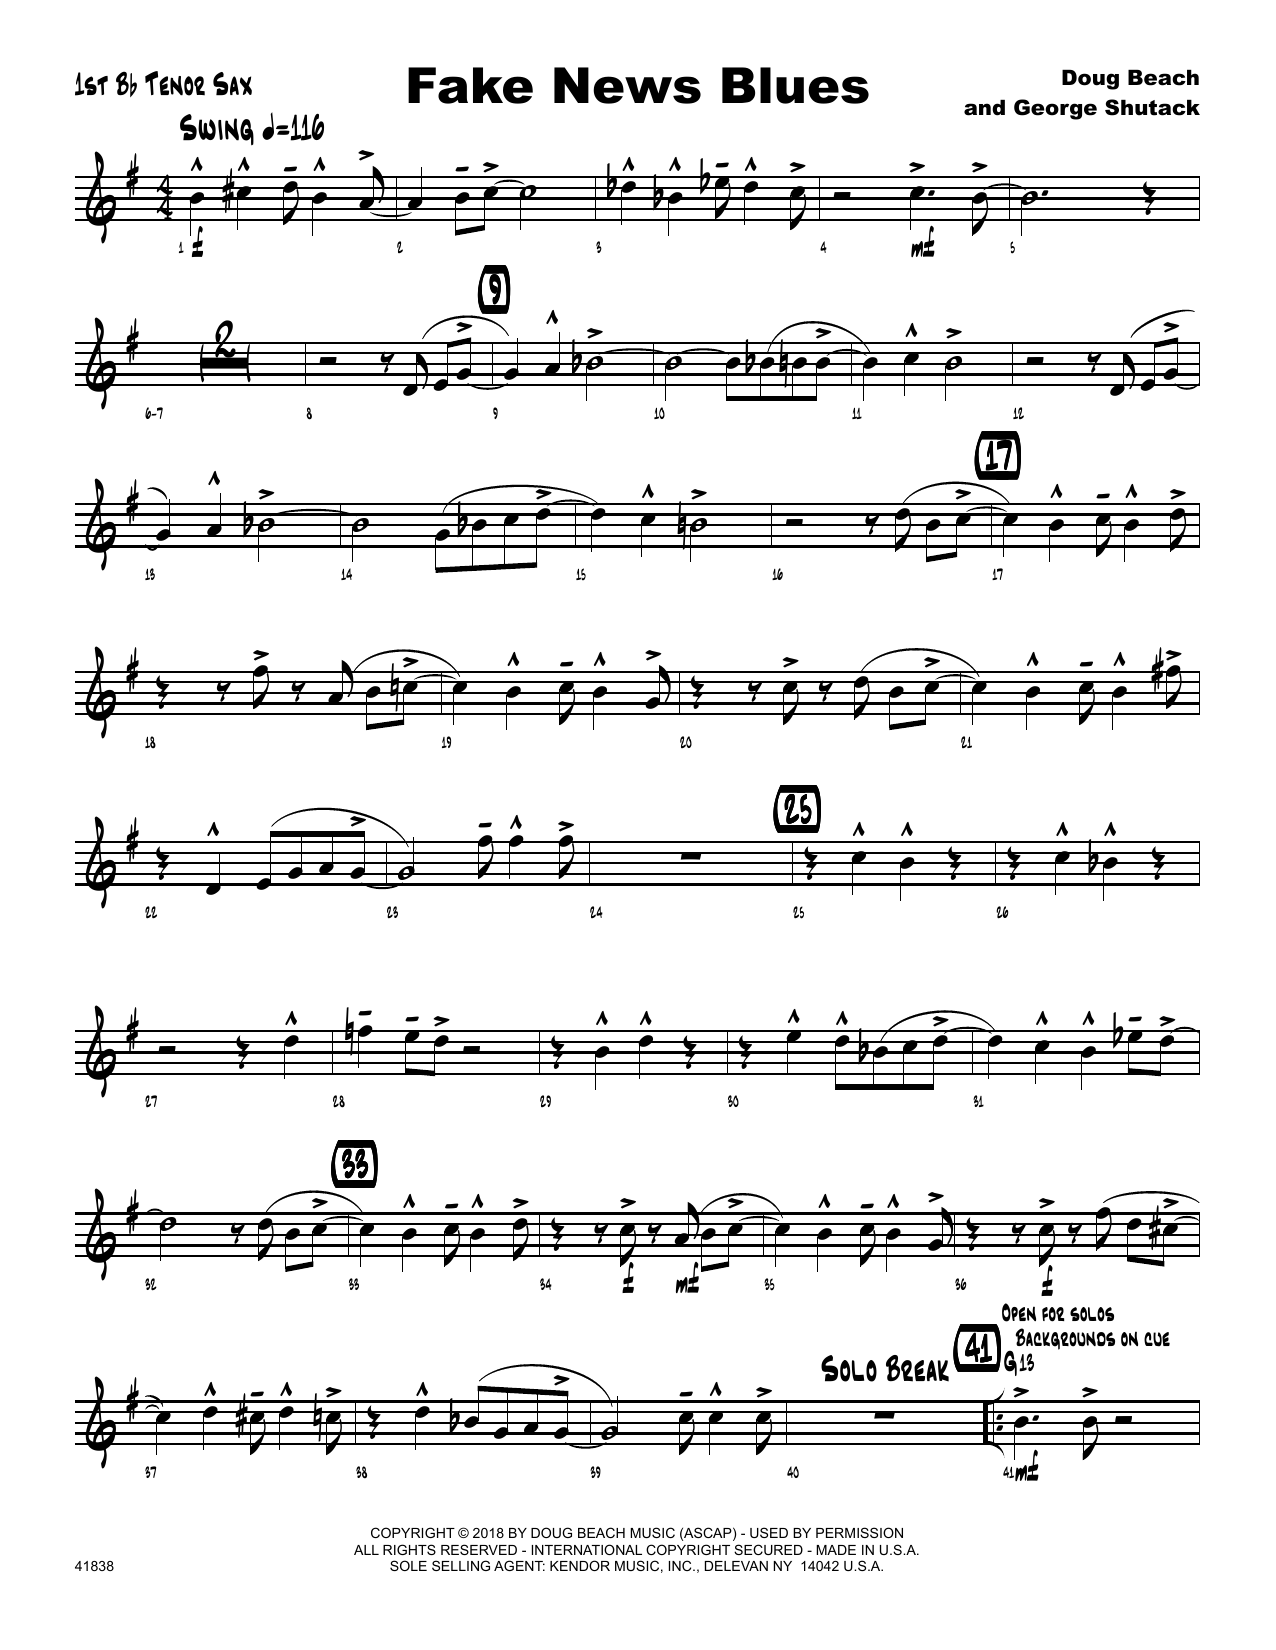 Doug Beach Fake News Blues - 1st Tenor Saxophone sheet music preview music notes and score for Jazz Ensemble including 2 page(s)